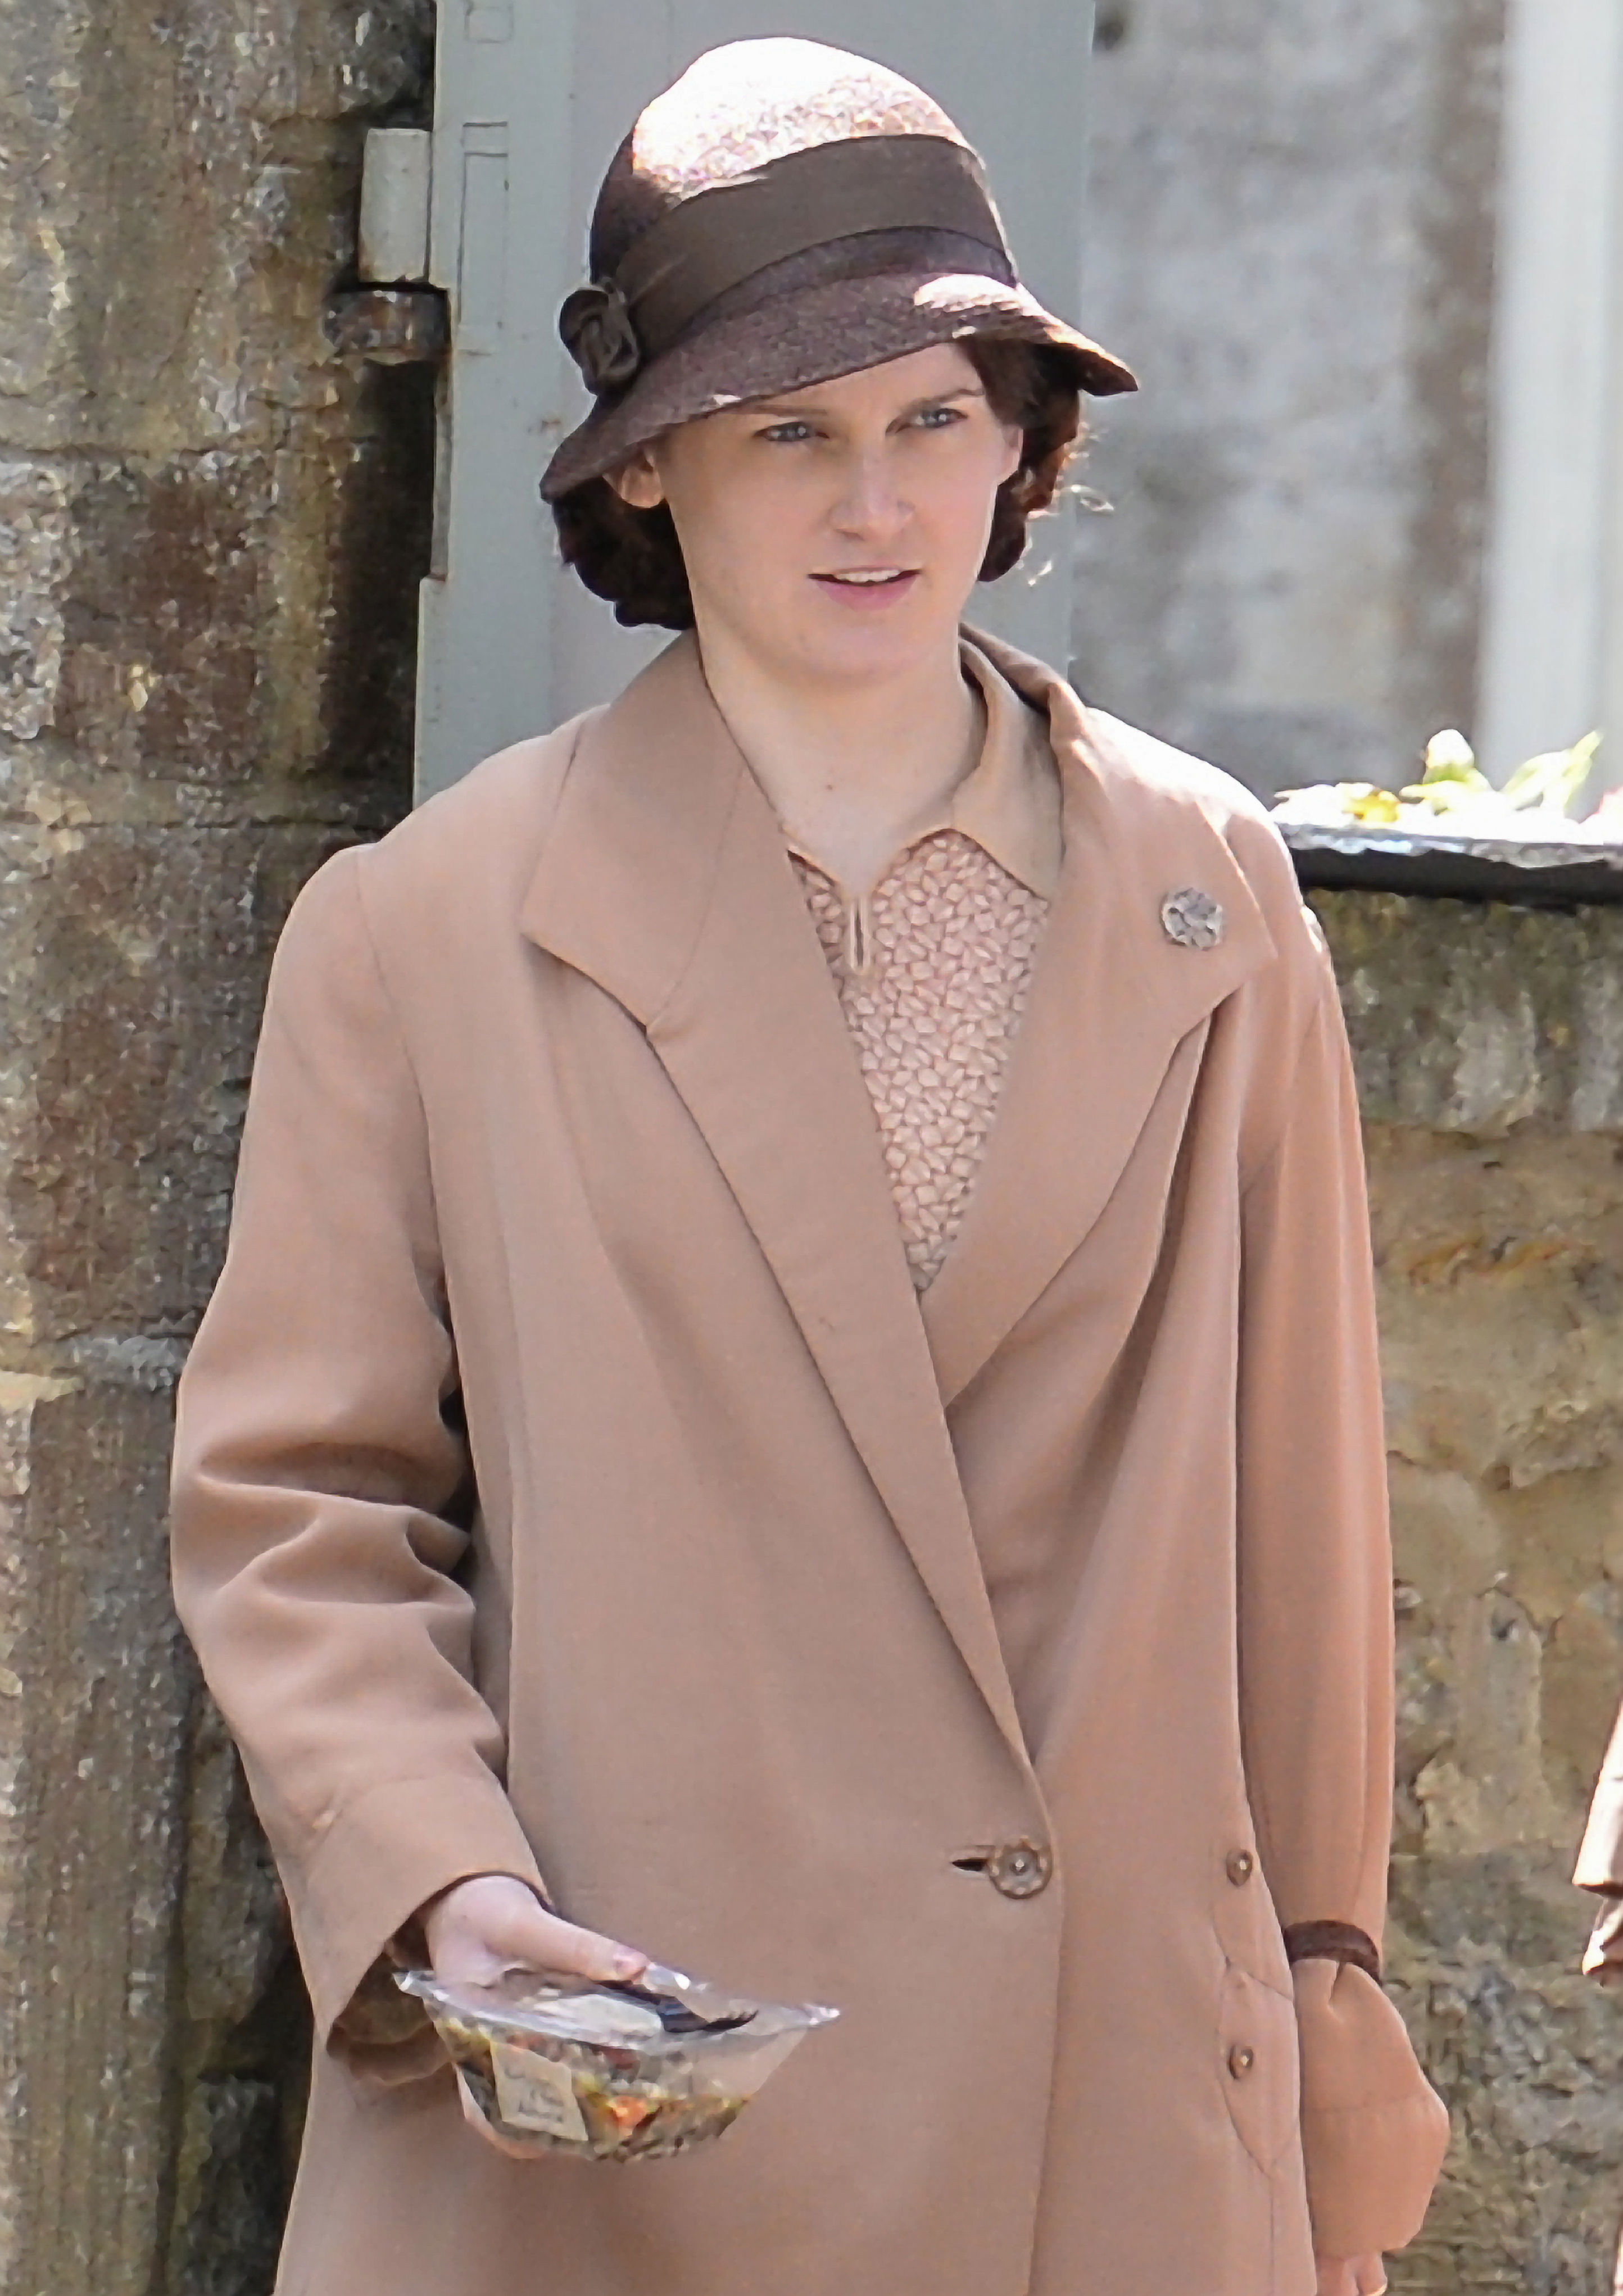 <p>Despite their devotion to the Crawleys, the downstairs servants do shed their uniforms once in a while! Here's how Daisy Mason (played by Sophie McShera) looked off-duty while filming "Downton Abbey" in Oxfordshire, England, in 2014. "As soon as you get to dress [the servants] in civilian clothes, it's a lovely challenge because you get to add that extra layer to their personality," costume designer Anna Mary Scott Robbins told <a href="https://fashionista.com/2015/02/downton-abbey-costume-designer-anna-robbins">Fashionista</a>. "You're able to add detailing that gives them that extra dimension."</p>